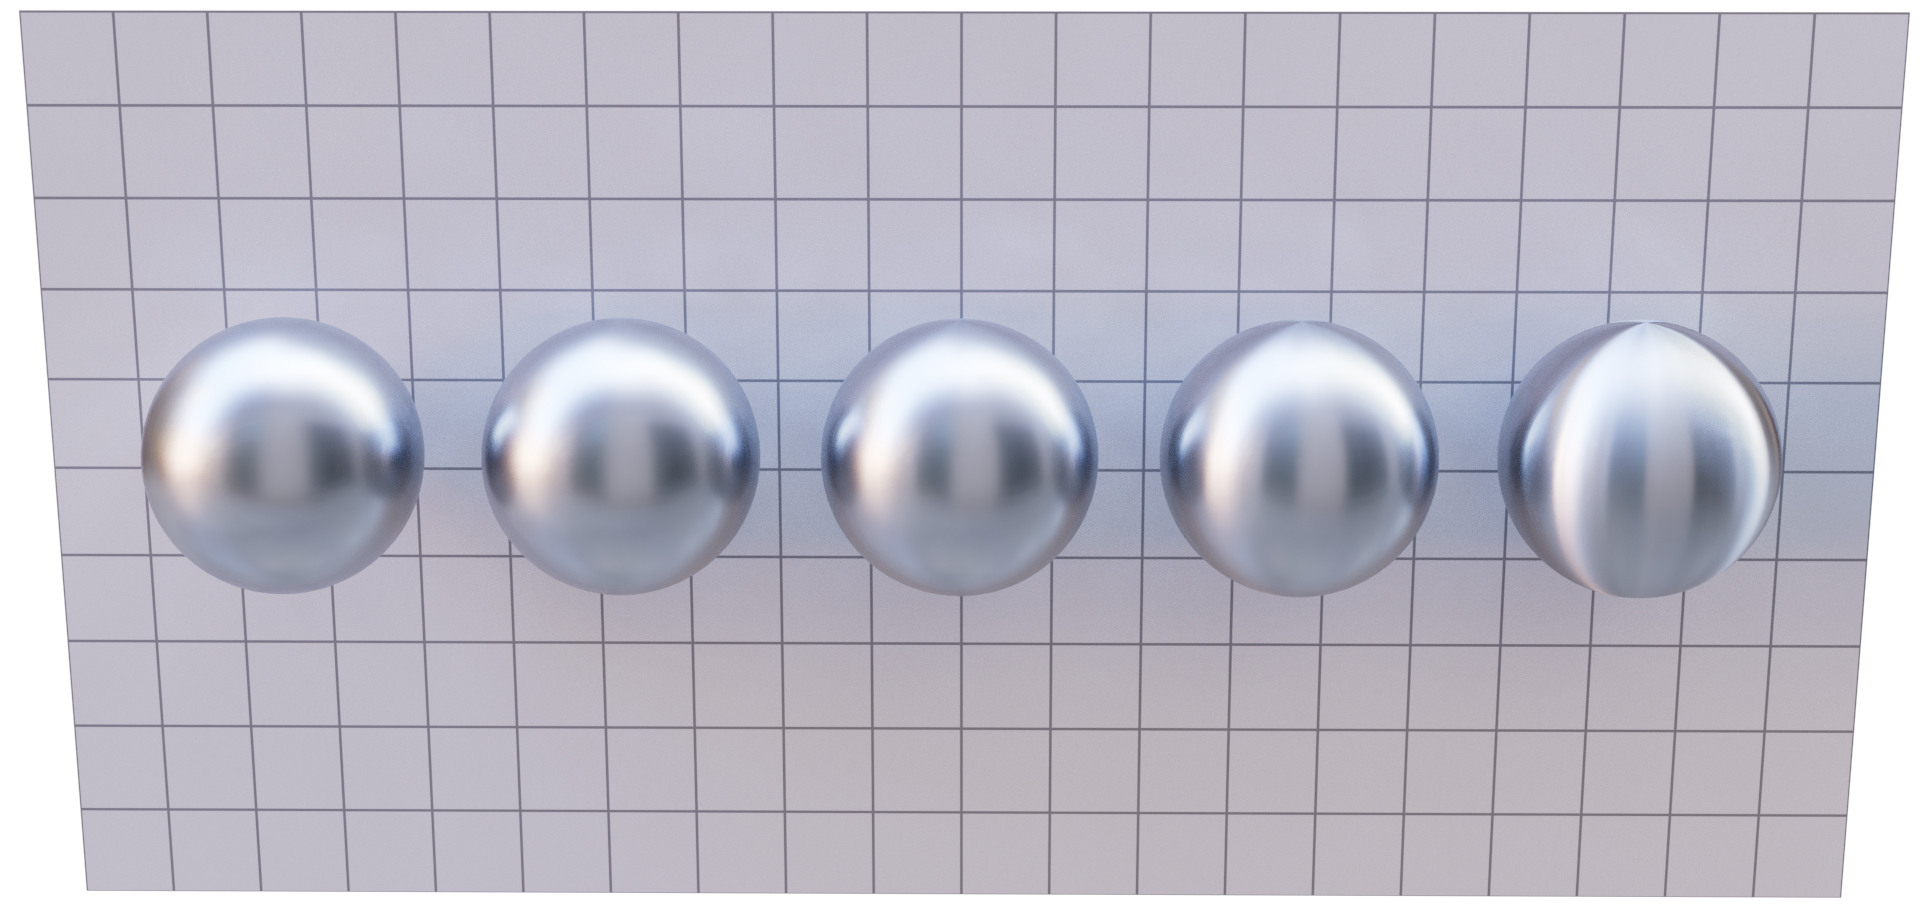 Anisotropy parameter, specular reflection, elongated highlights